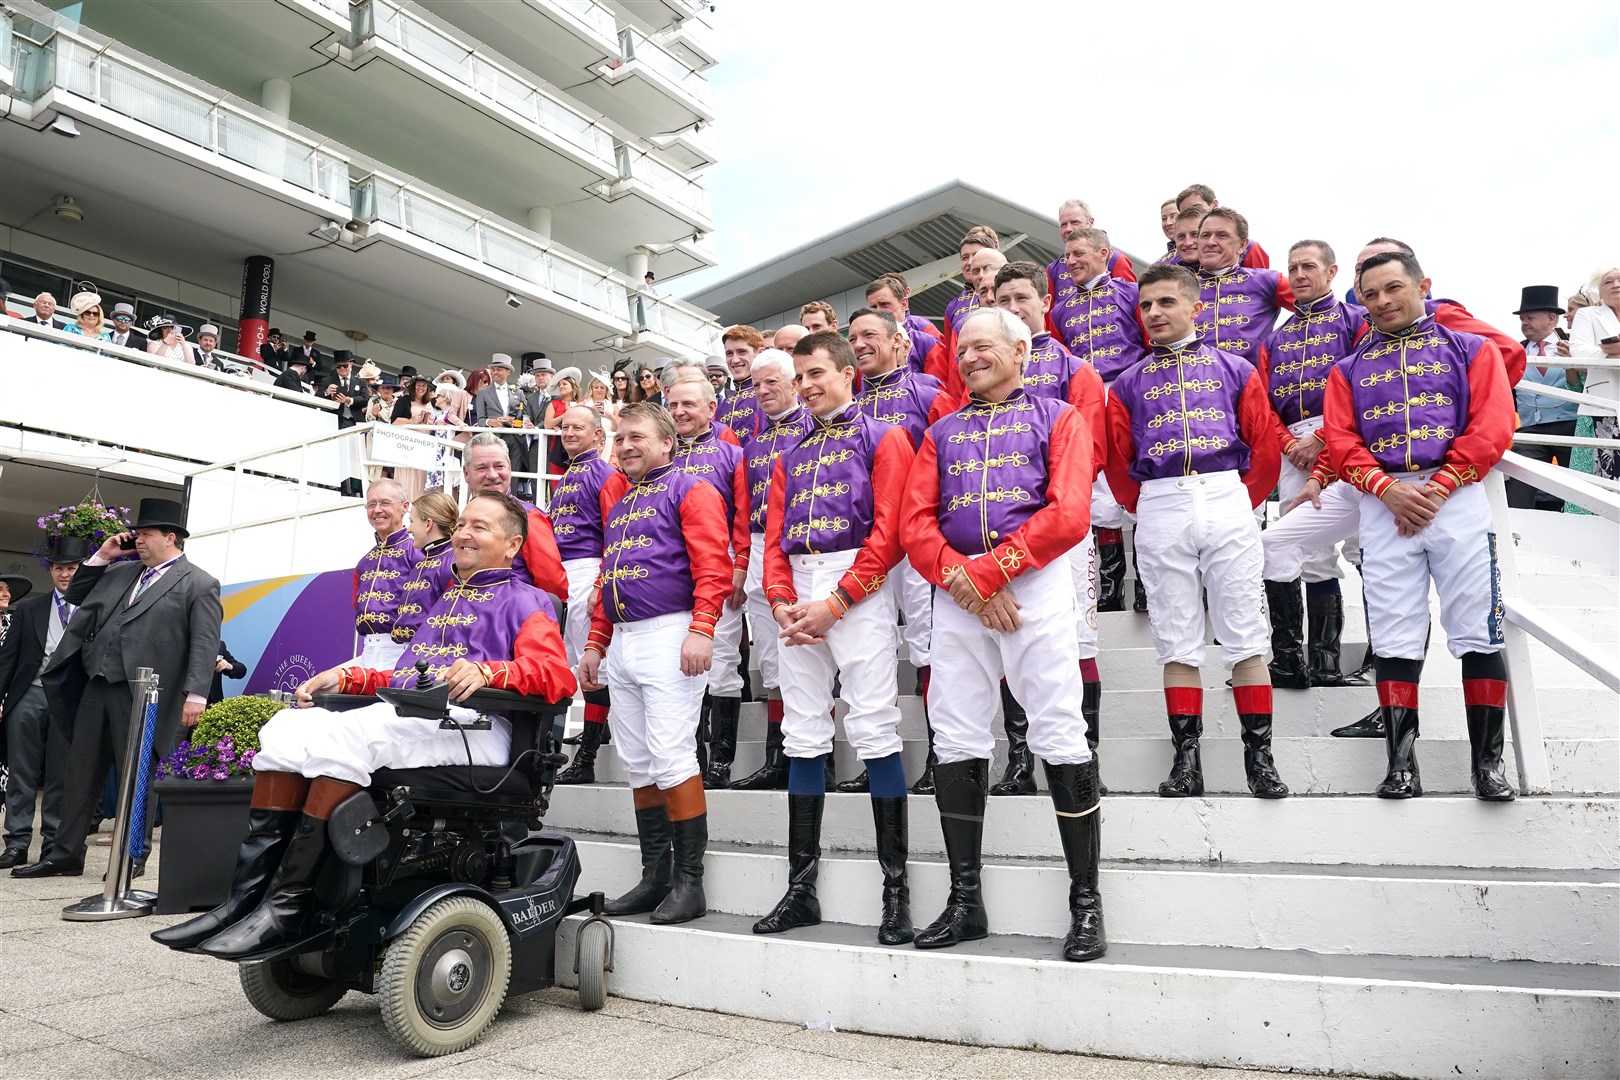 Jockeys who have ridden horses for the Queen lined up in her racing colours at Epsom (Tim Goode/PA)